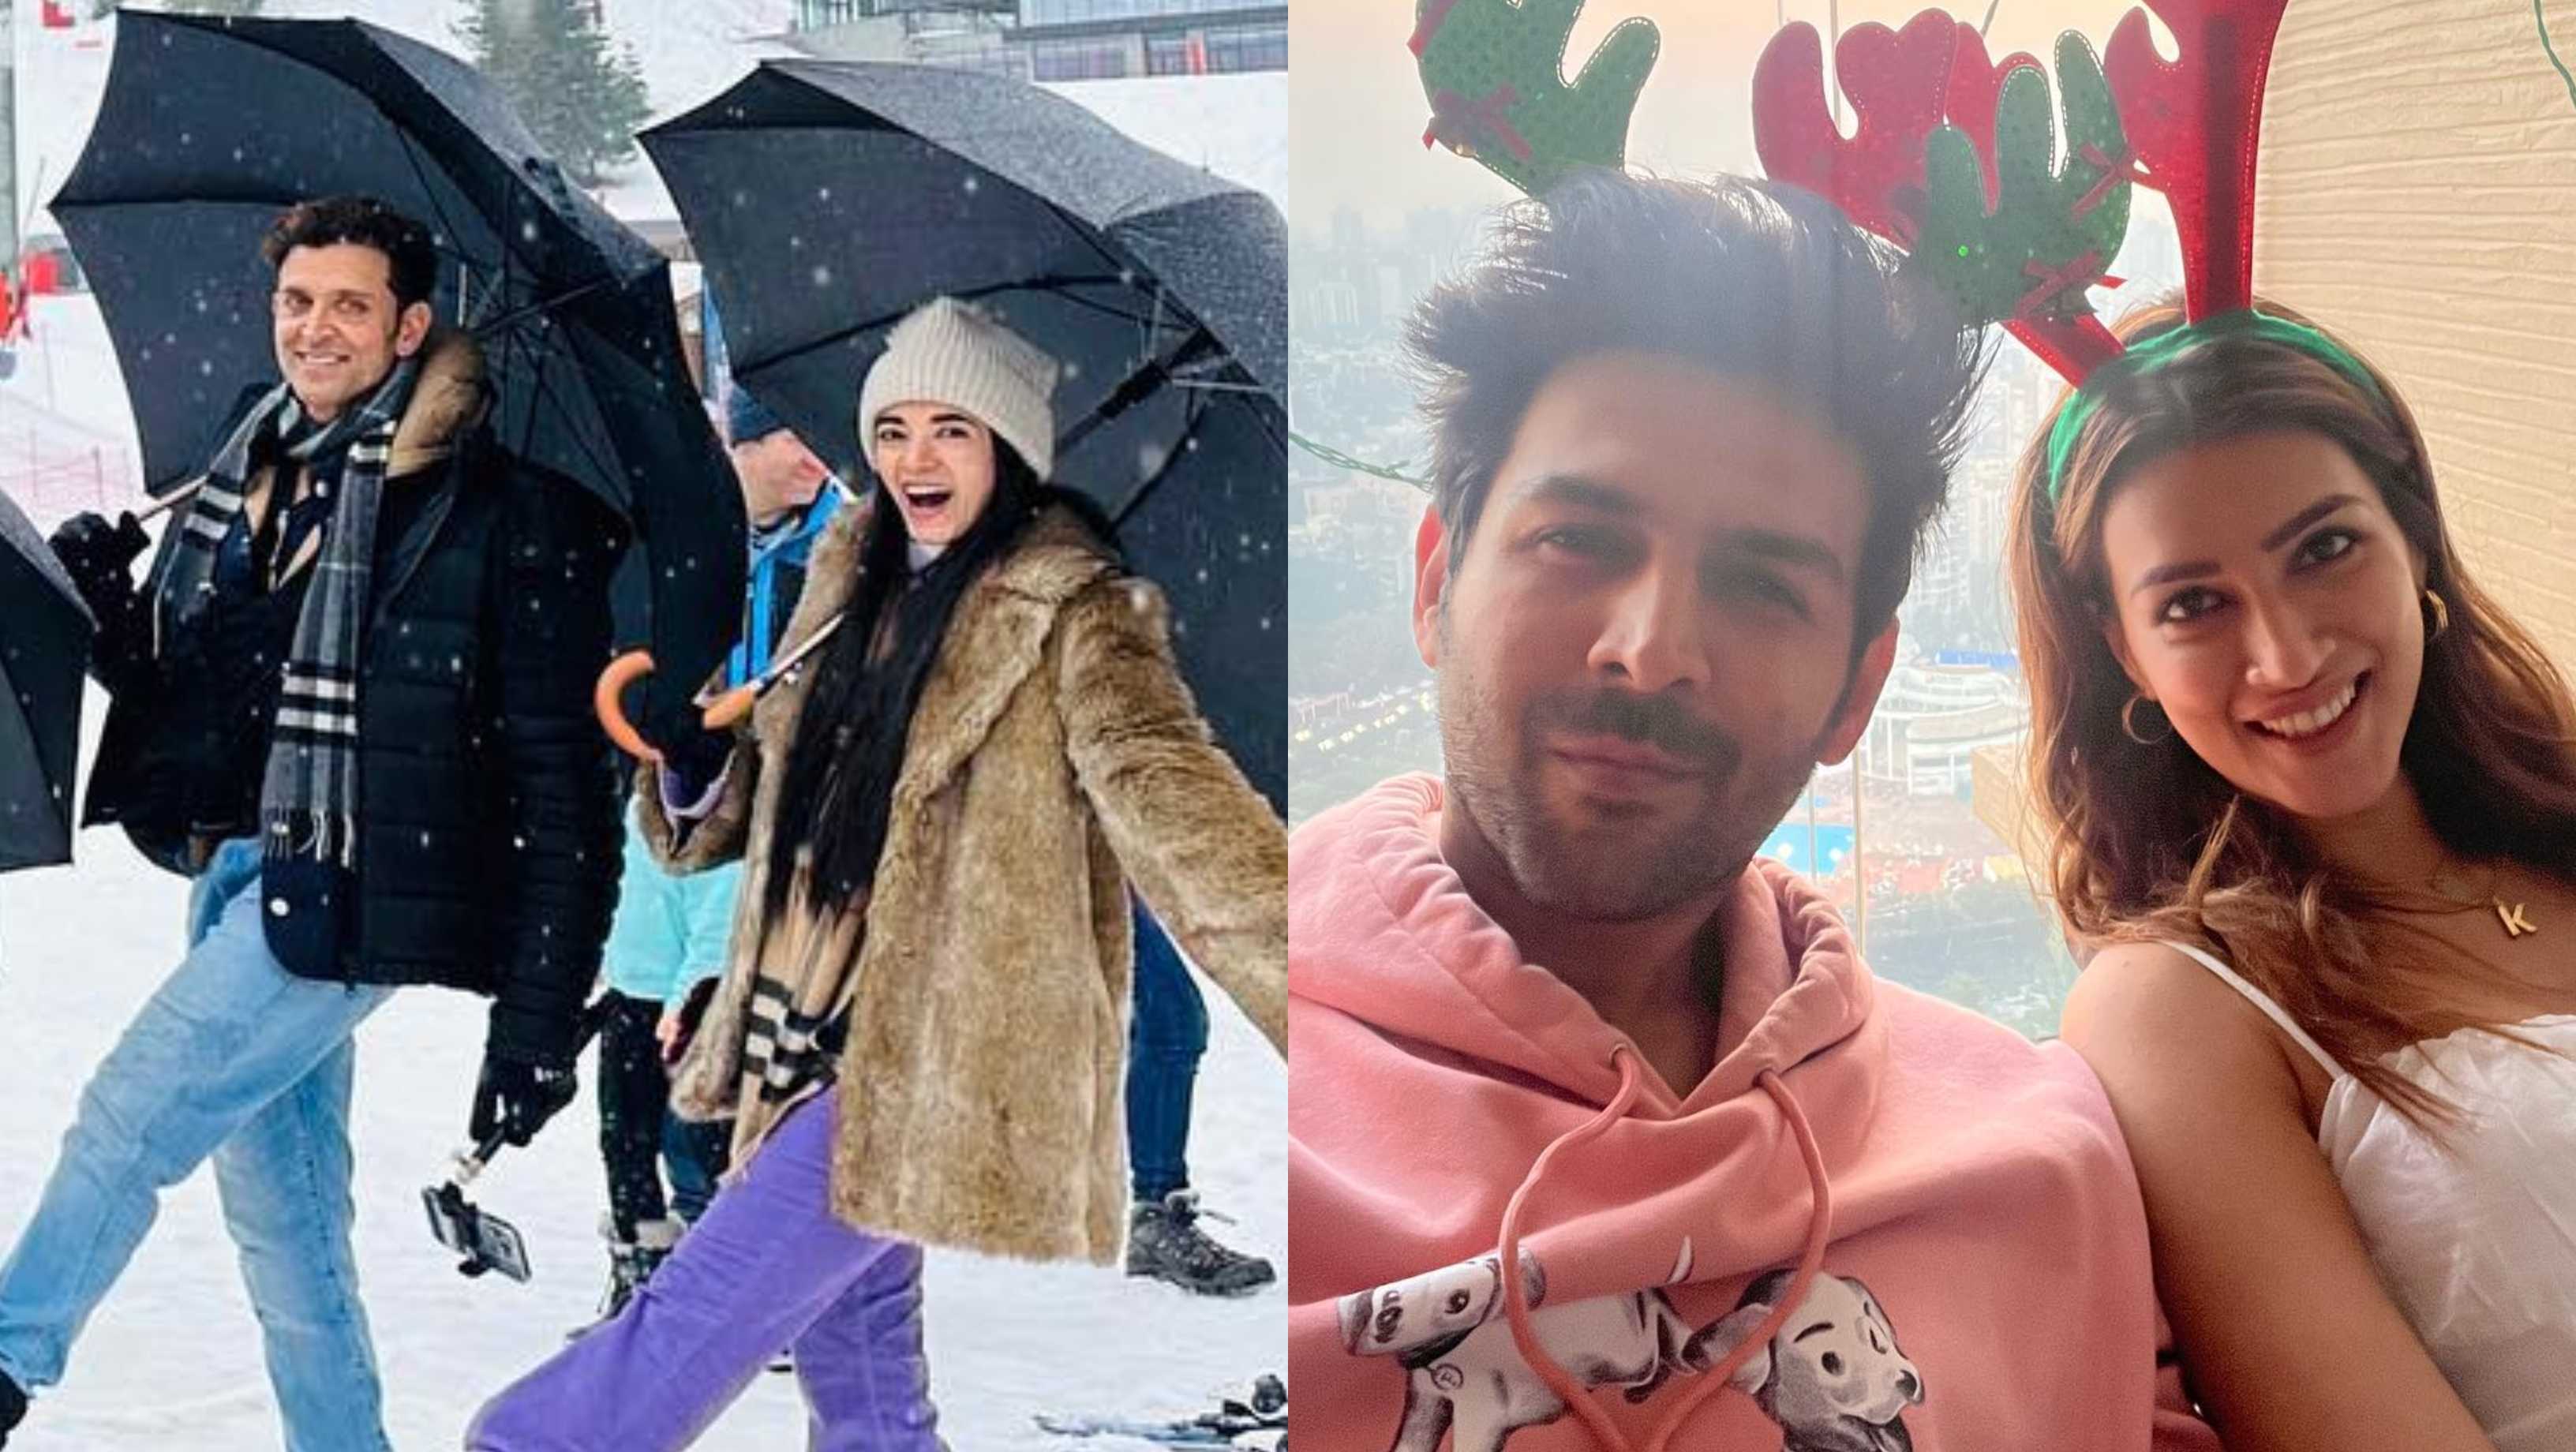 From Hrithik and Saba to Kartik and Kriti, Bollywood celebs share a glimpse of their Christmas with loved ones